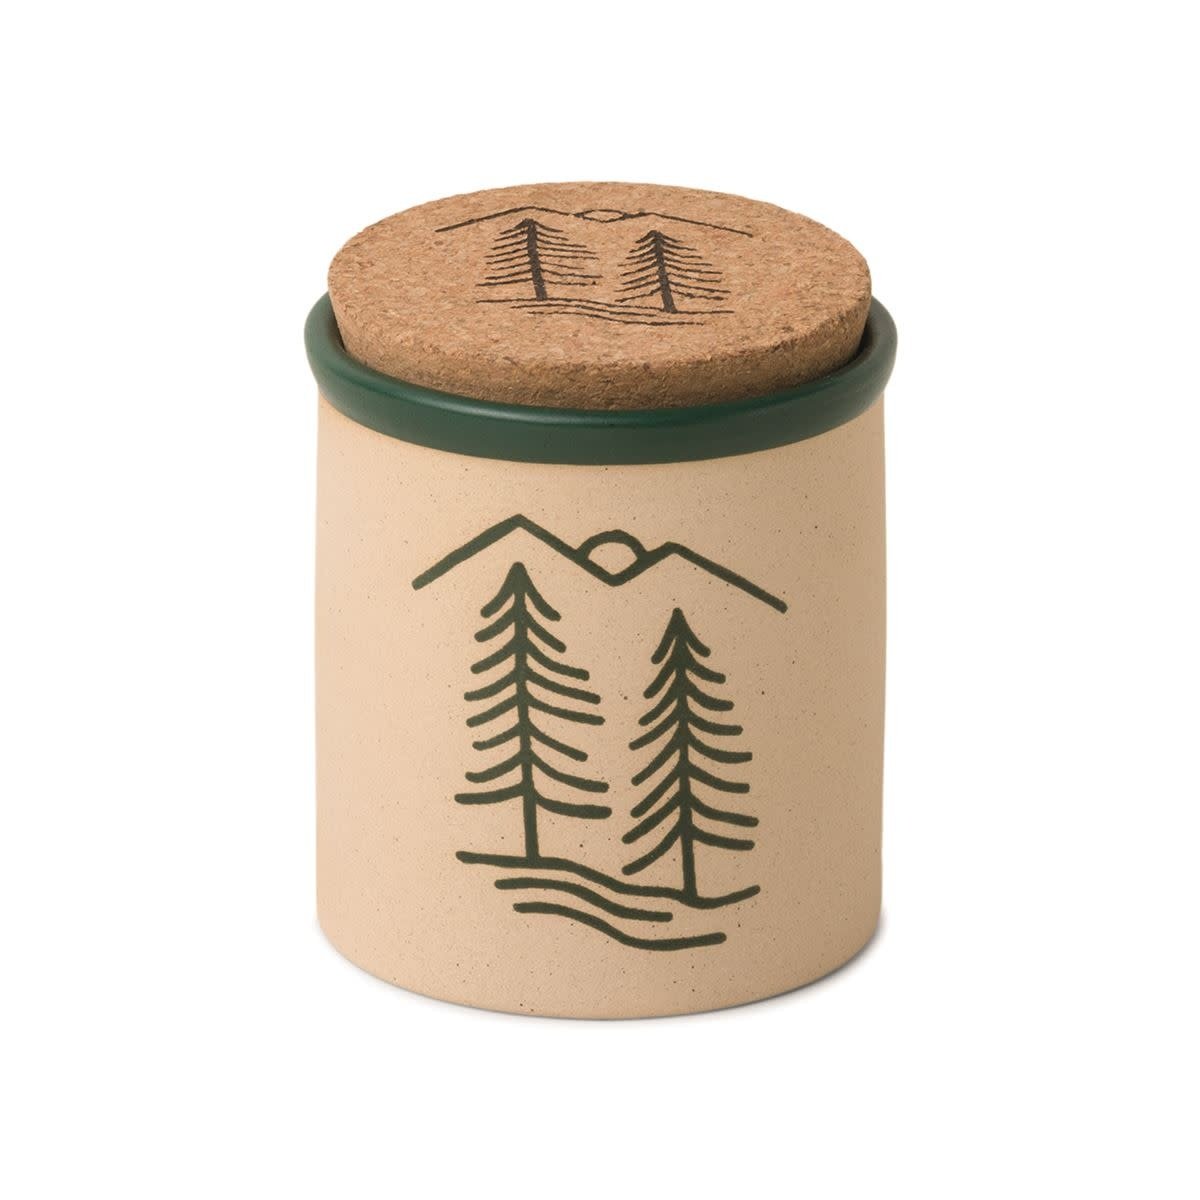 Paddywax - PA Forest Dune Cypress & Fir Candle, 8 oz. Green